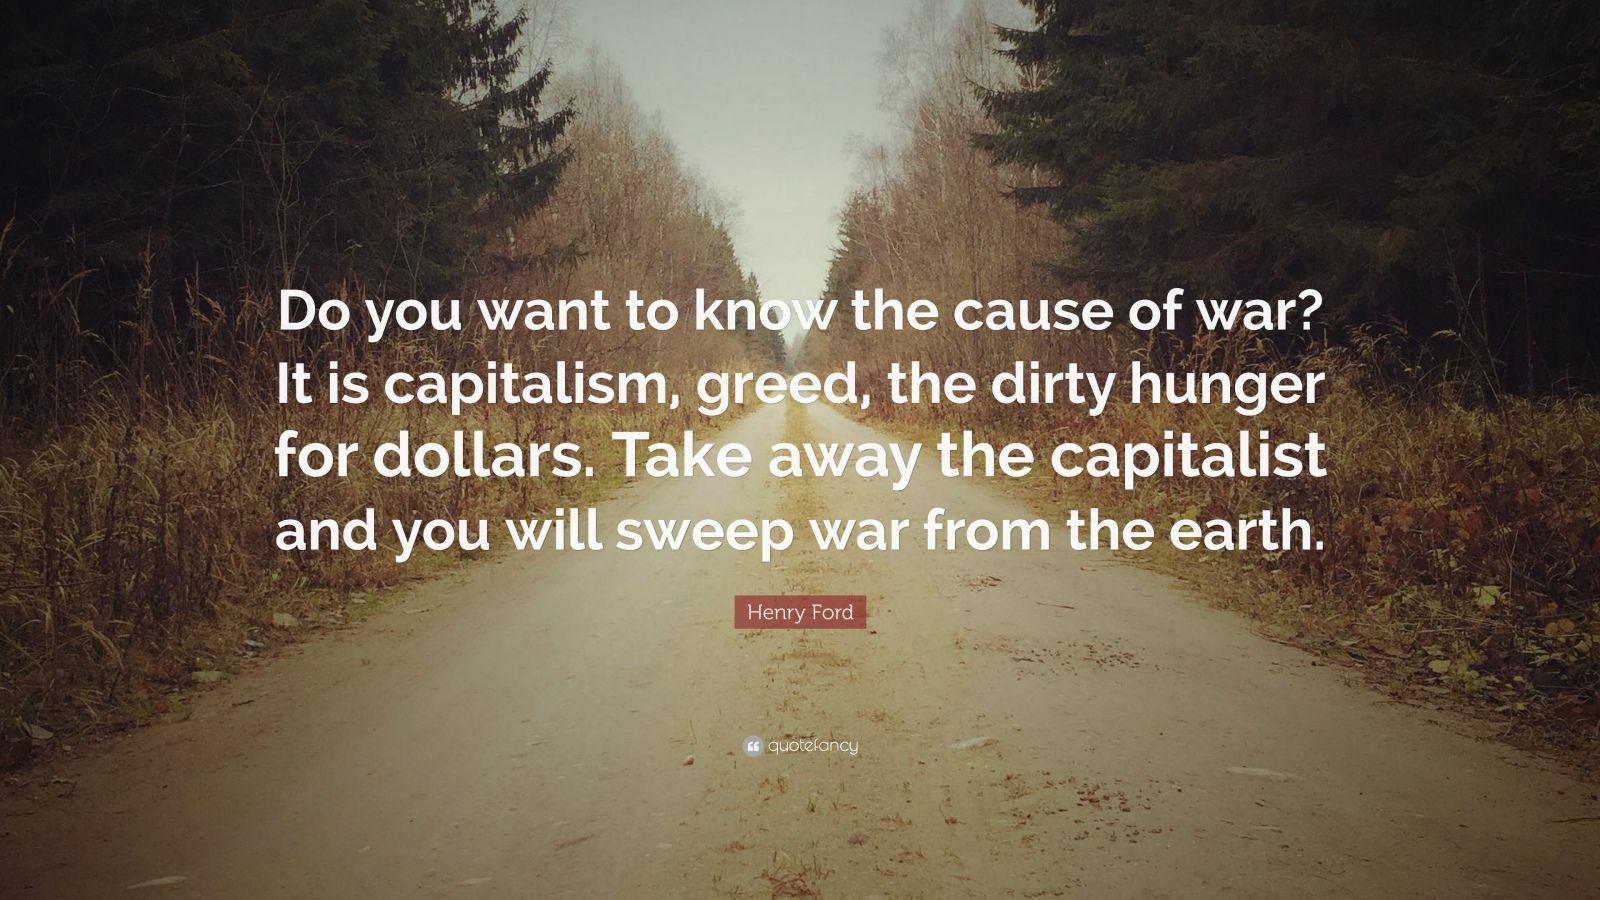 Henry Ford Quote: “Do you want to know the cause of war? It is ...